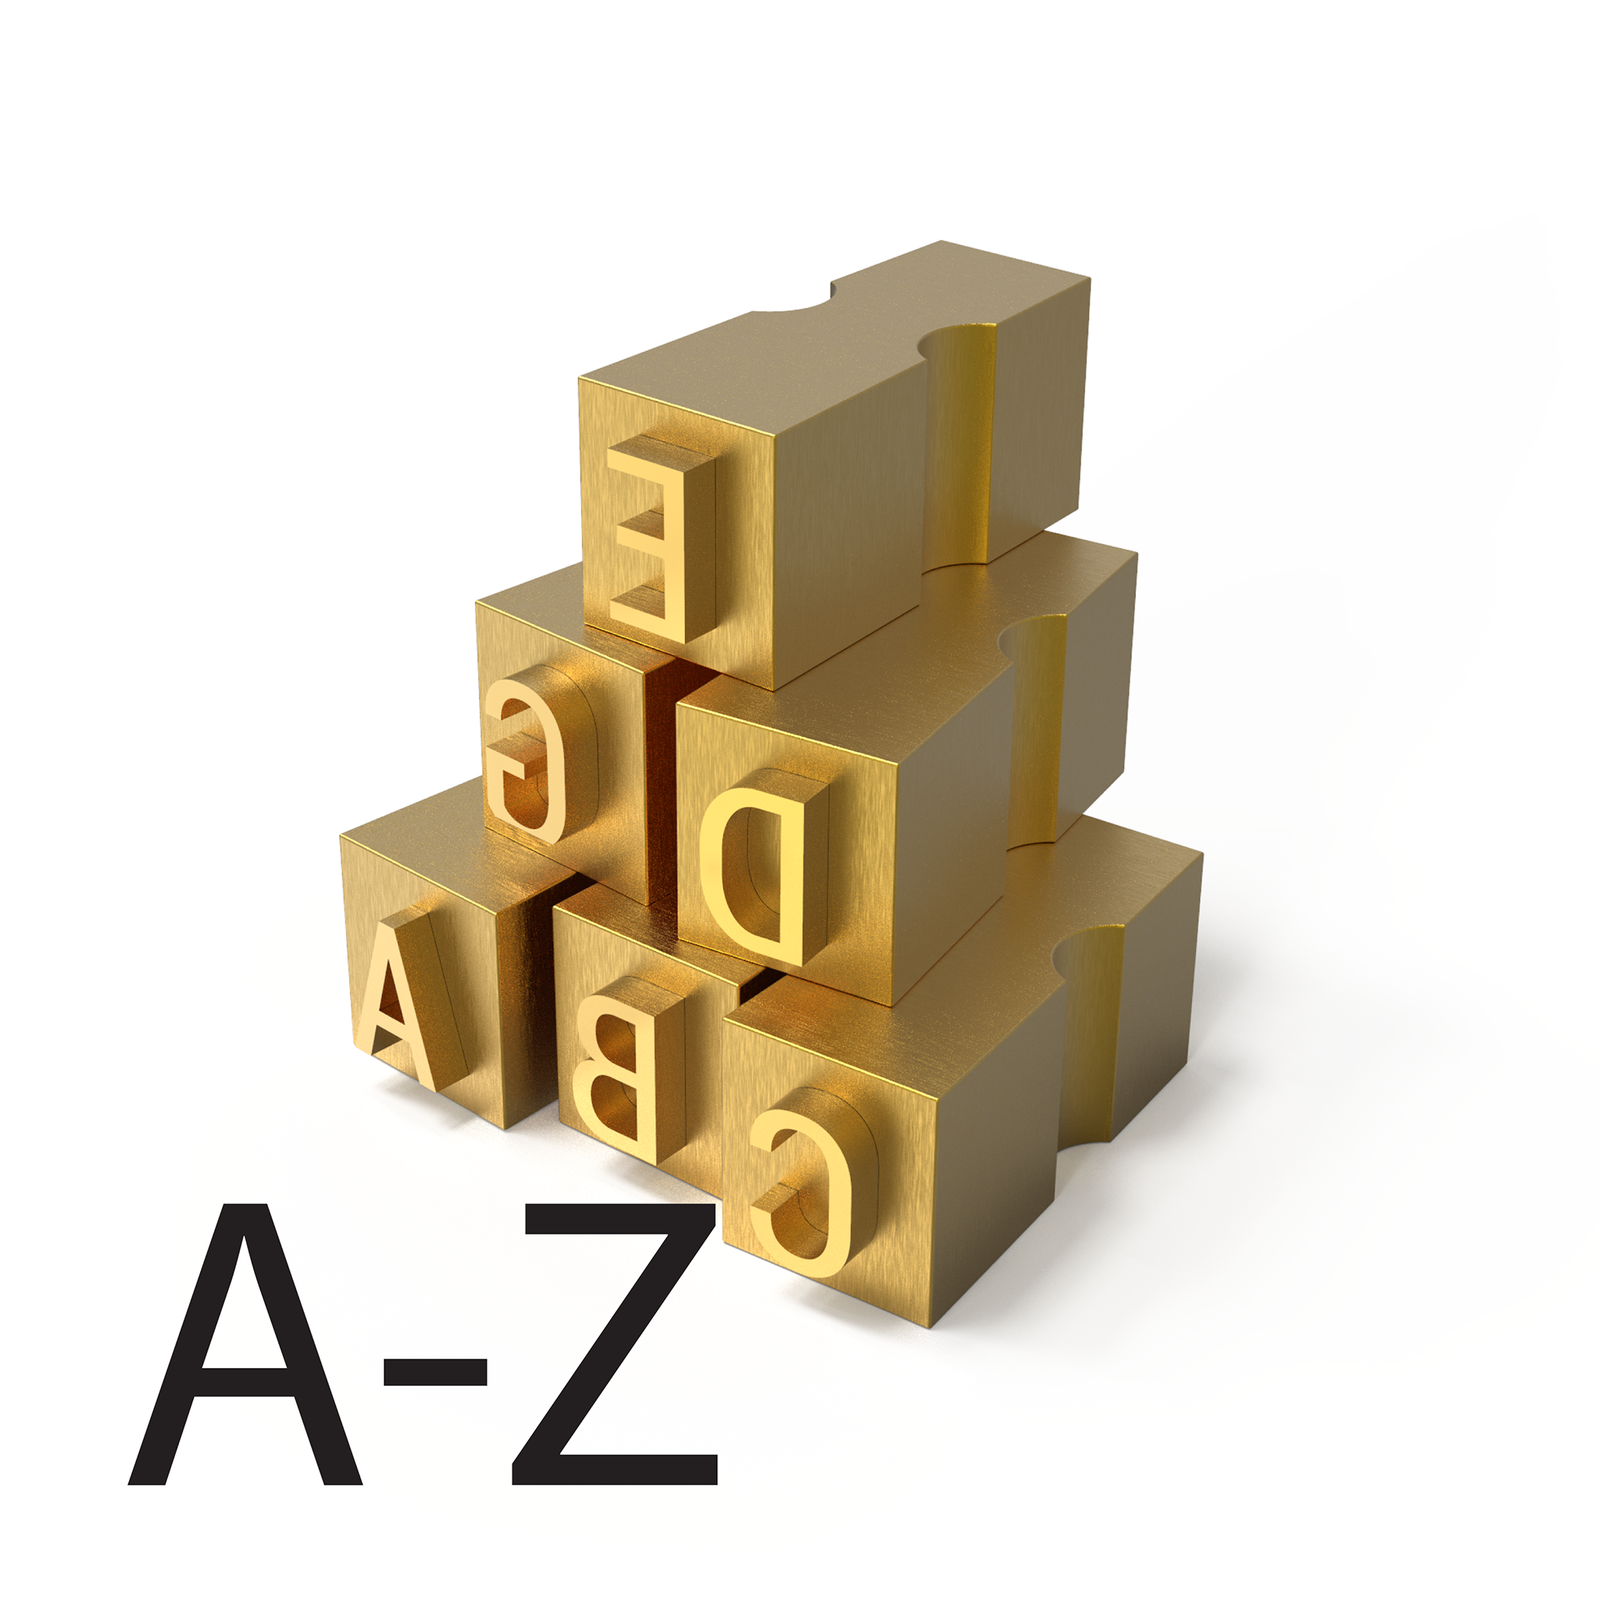 Set of letter types from A to Z used in hot ink printers